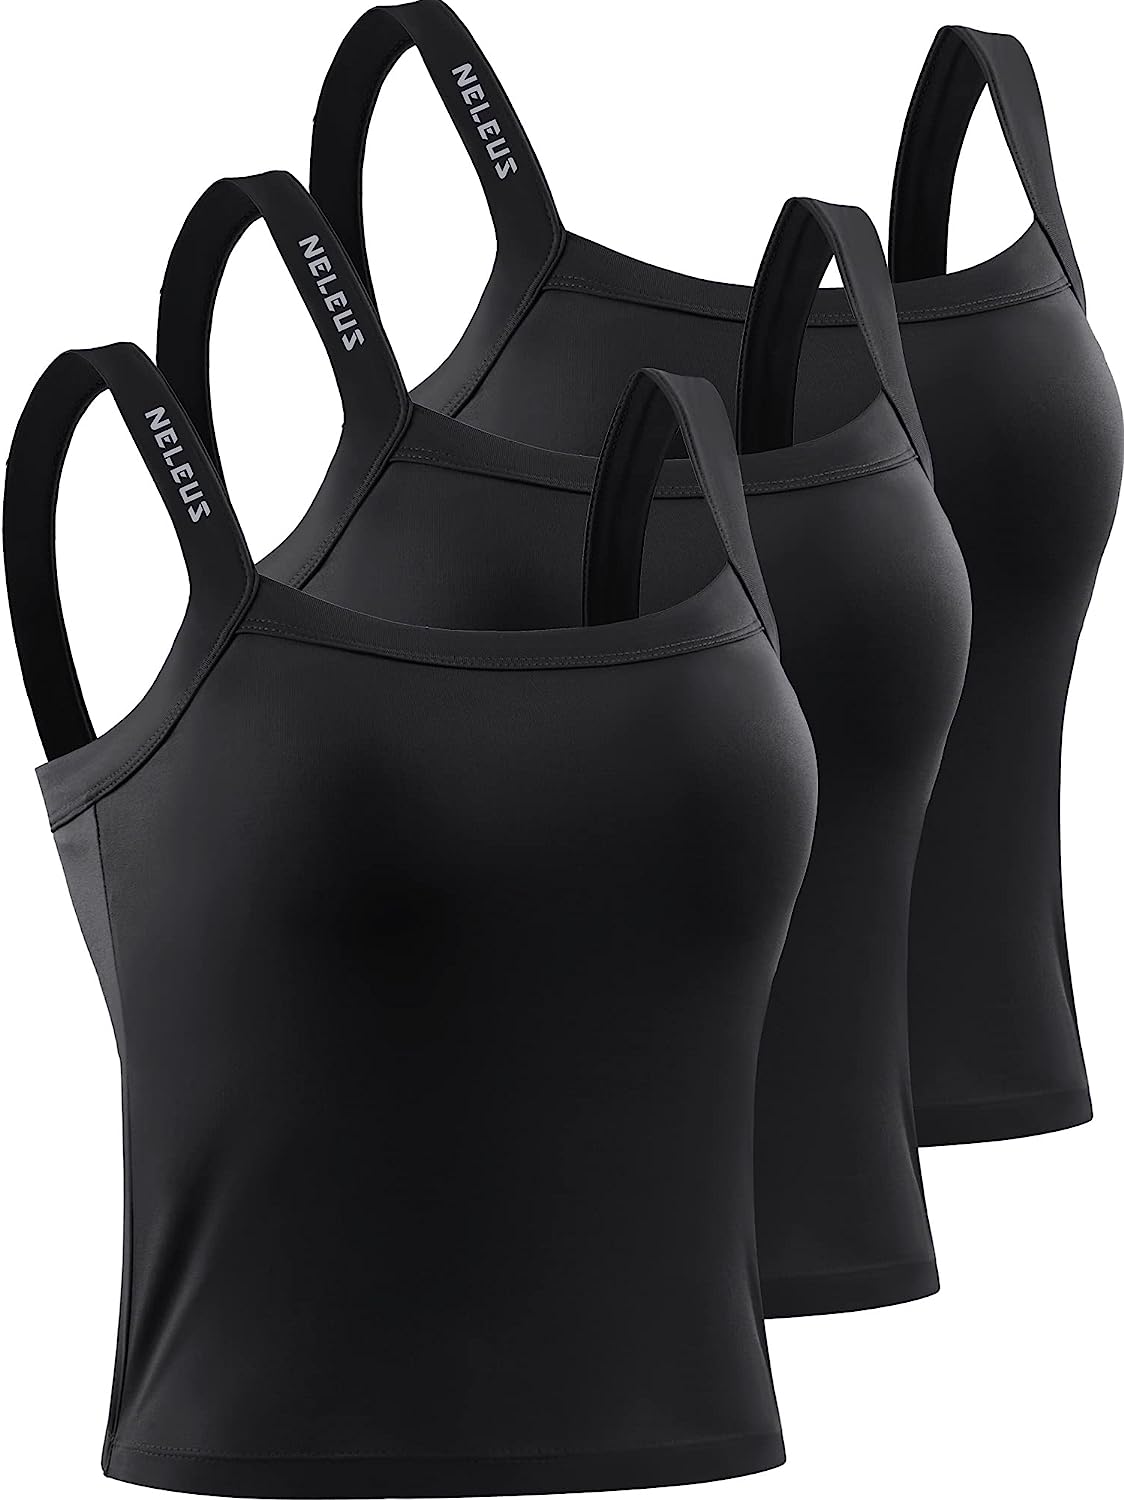 NELEUS Women's 3 Pack Athletic Compression Tank Top with